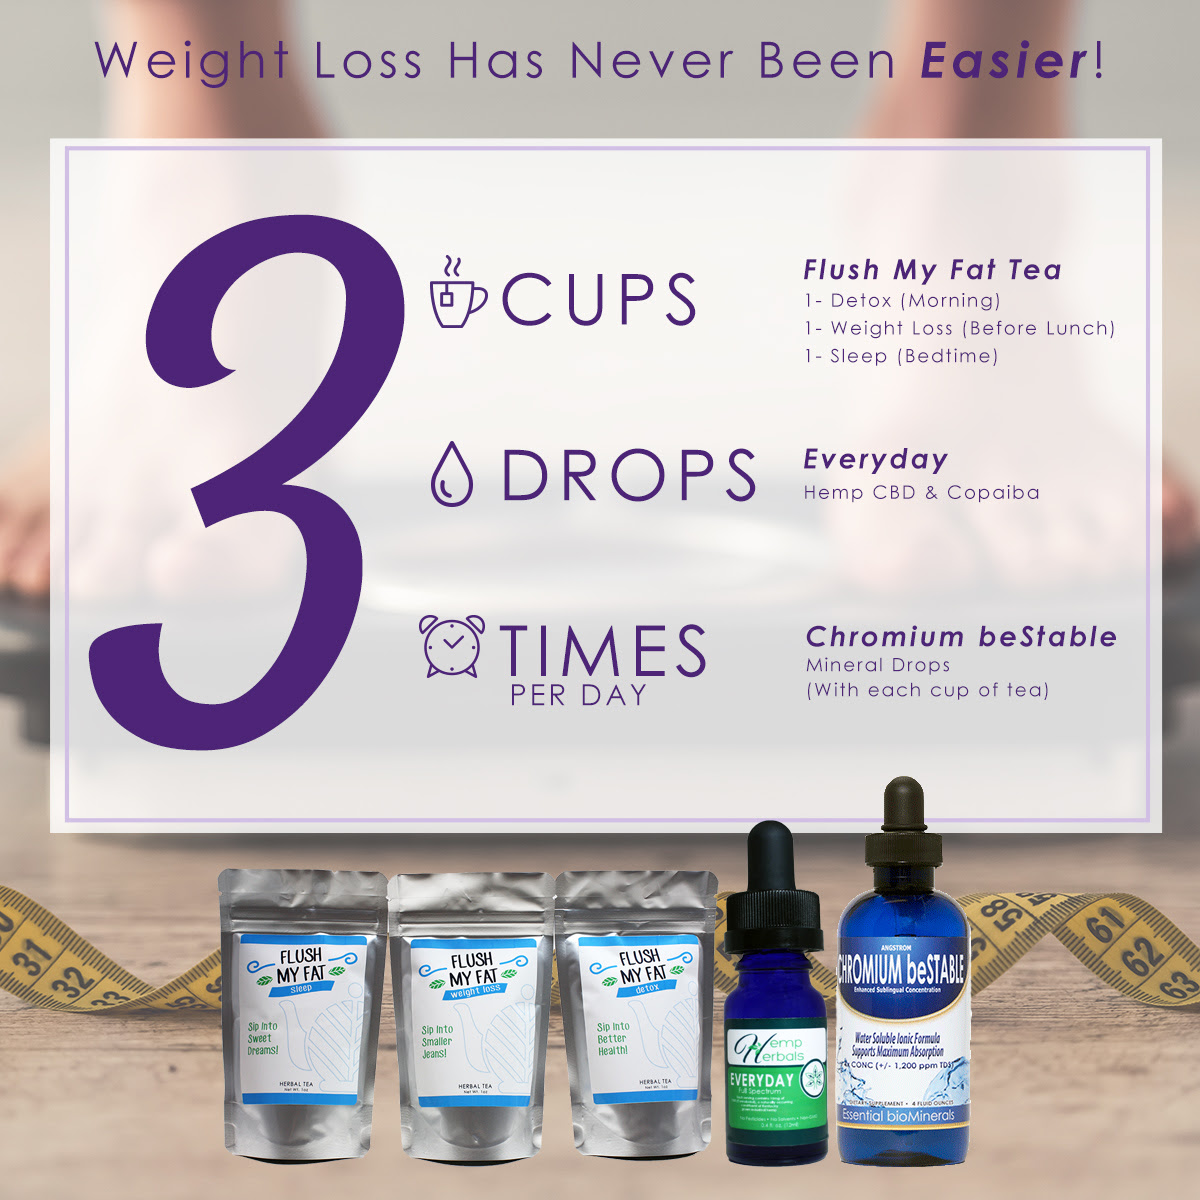 Weight Loss Has Never Been Easier!